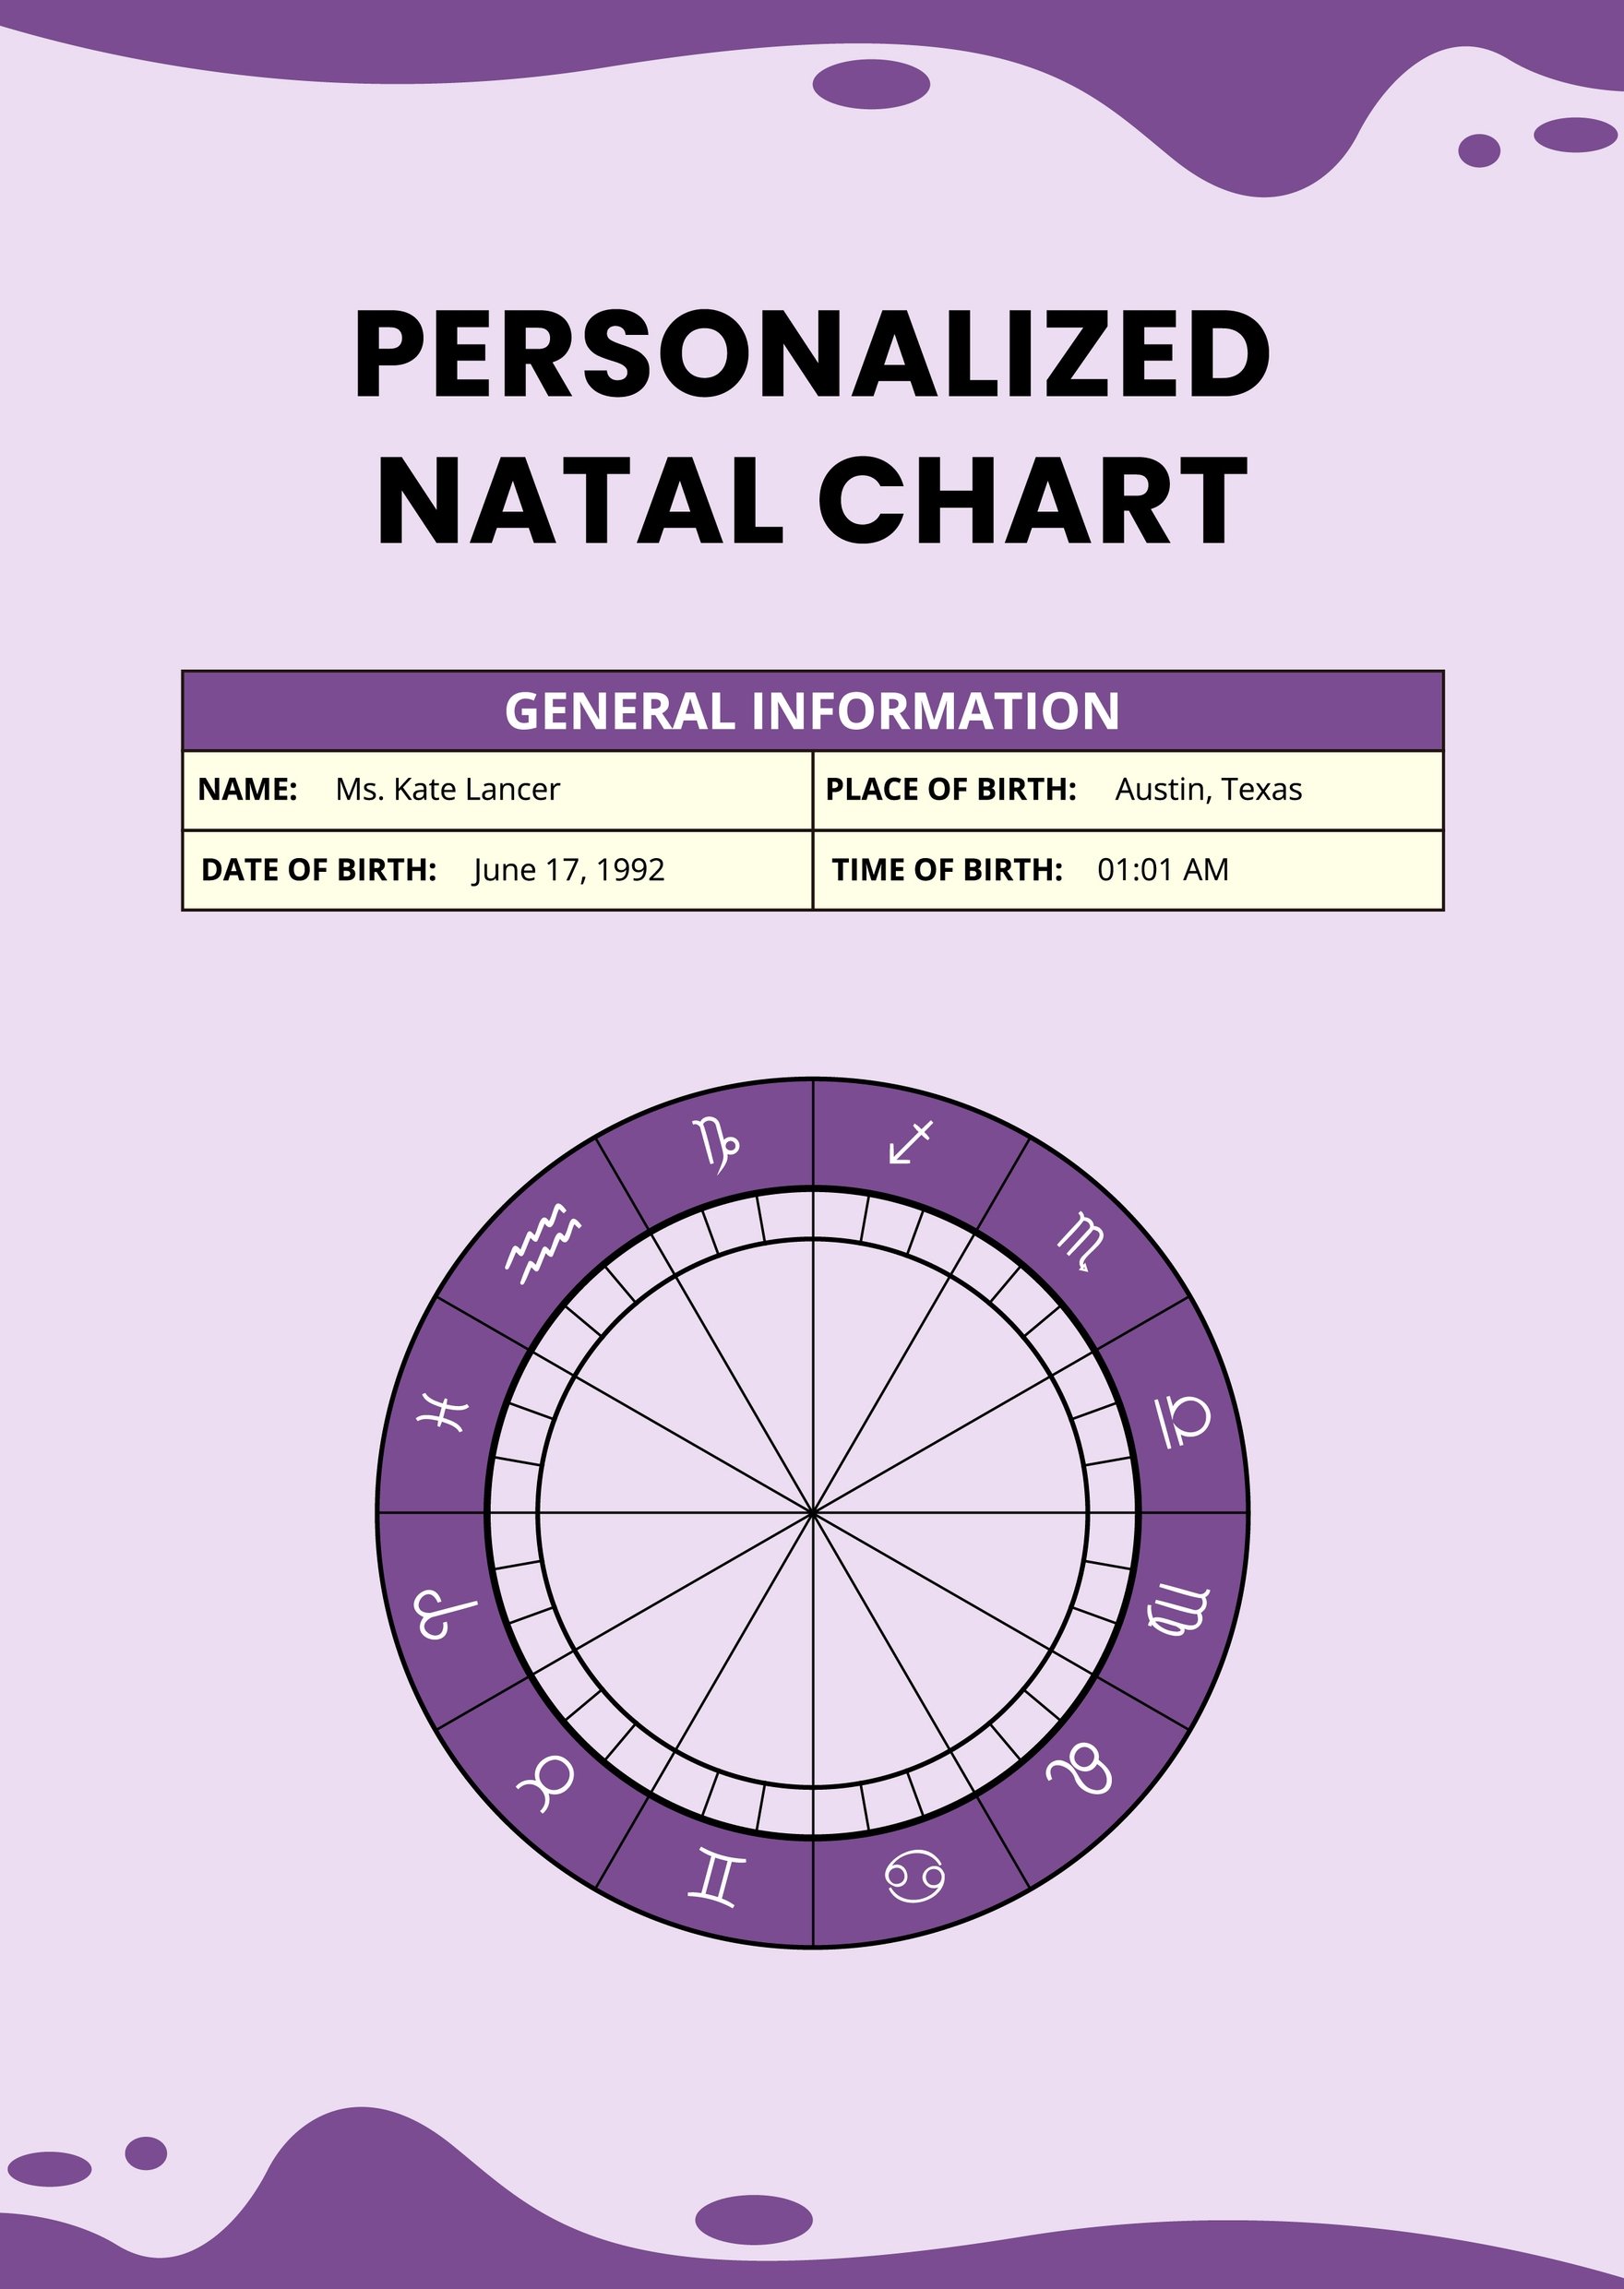 Personalized Natal Chart Template in PDF, Illustrator